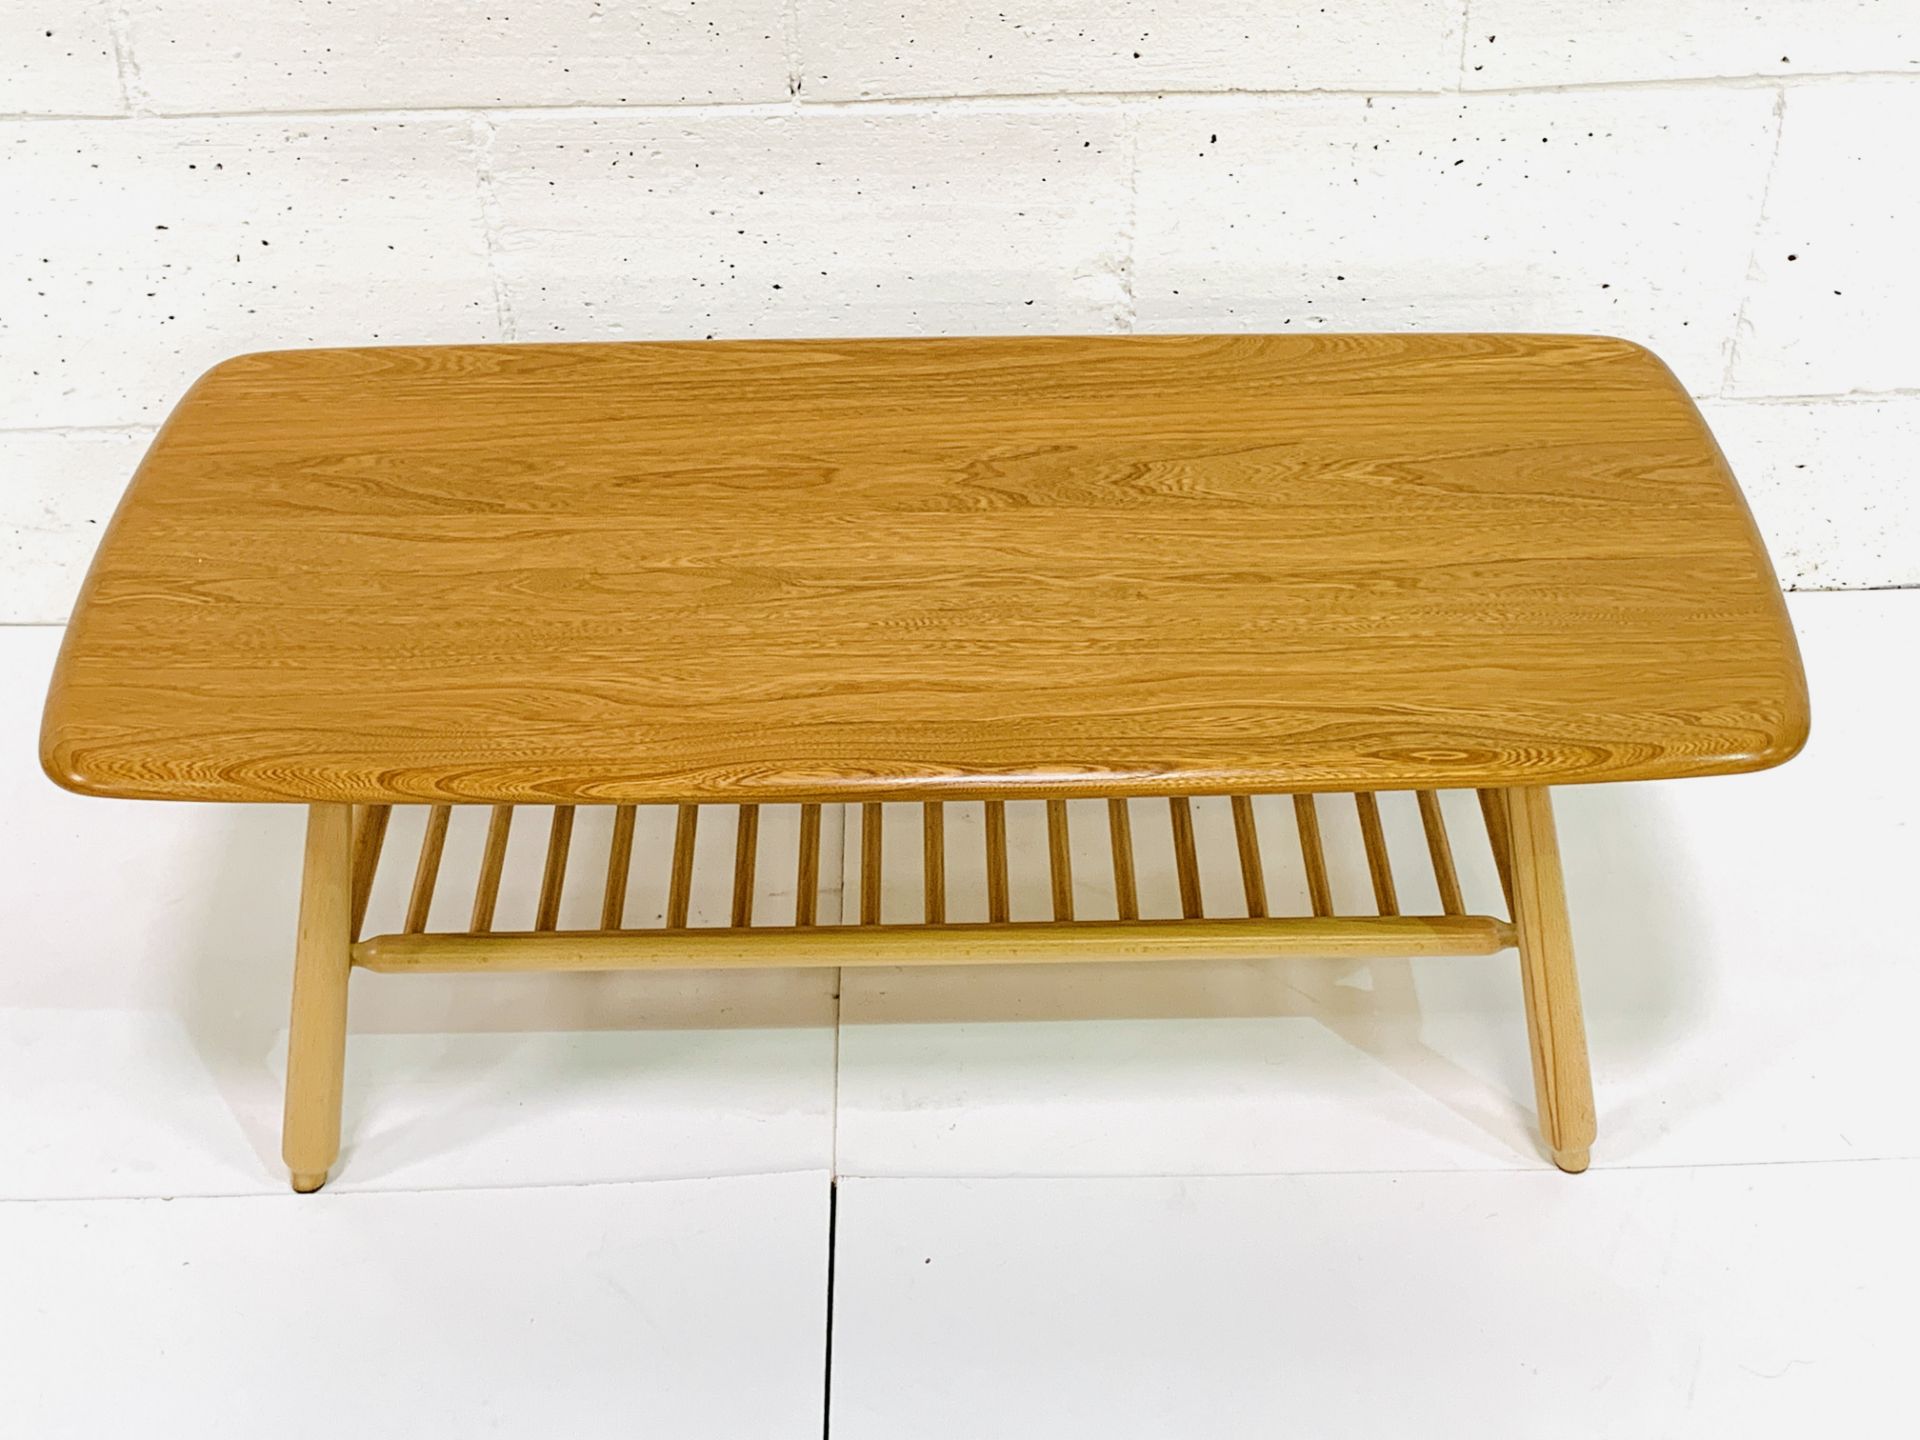 Ercol coffee table - Image 2 of 4